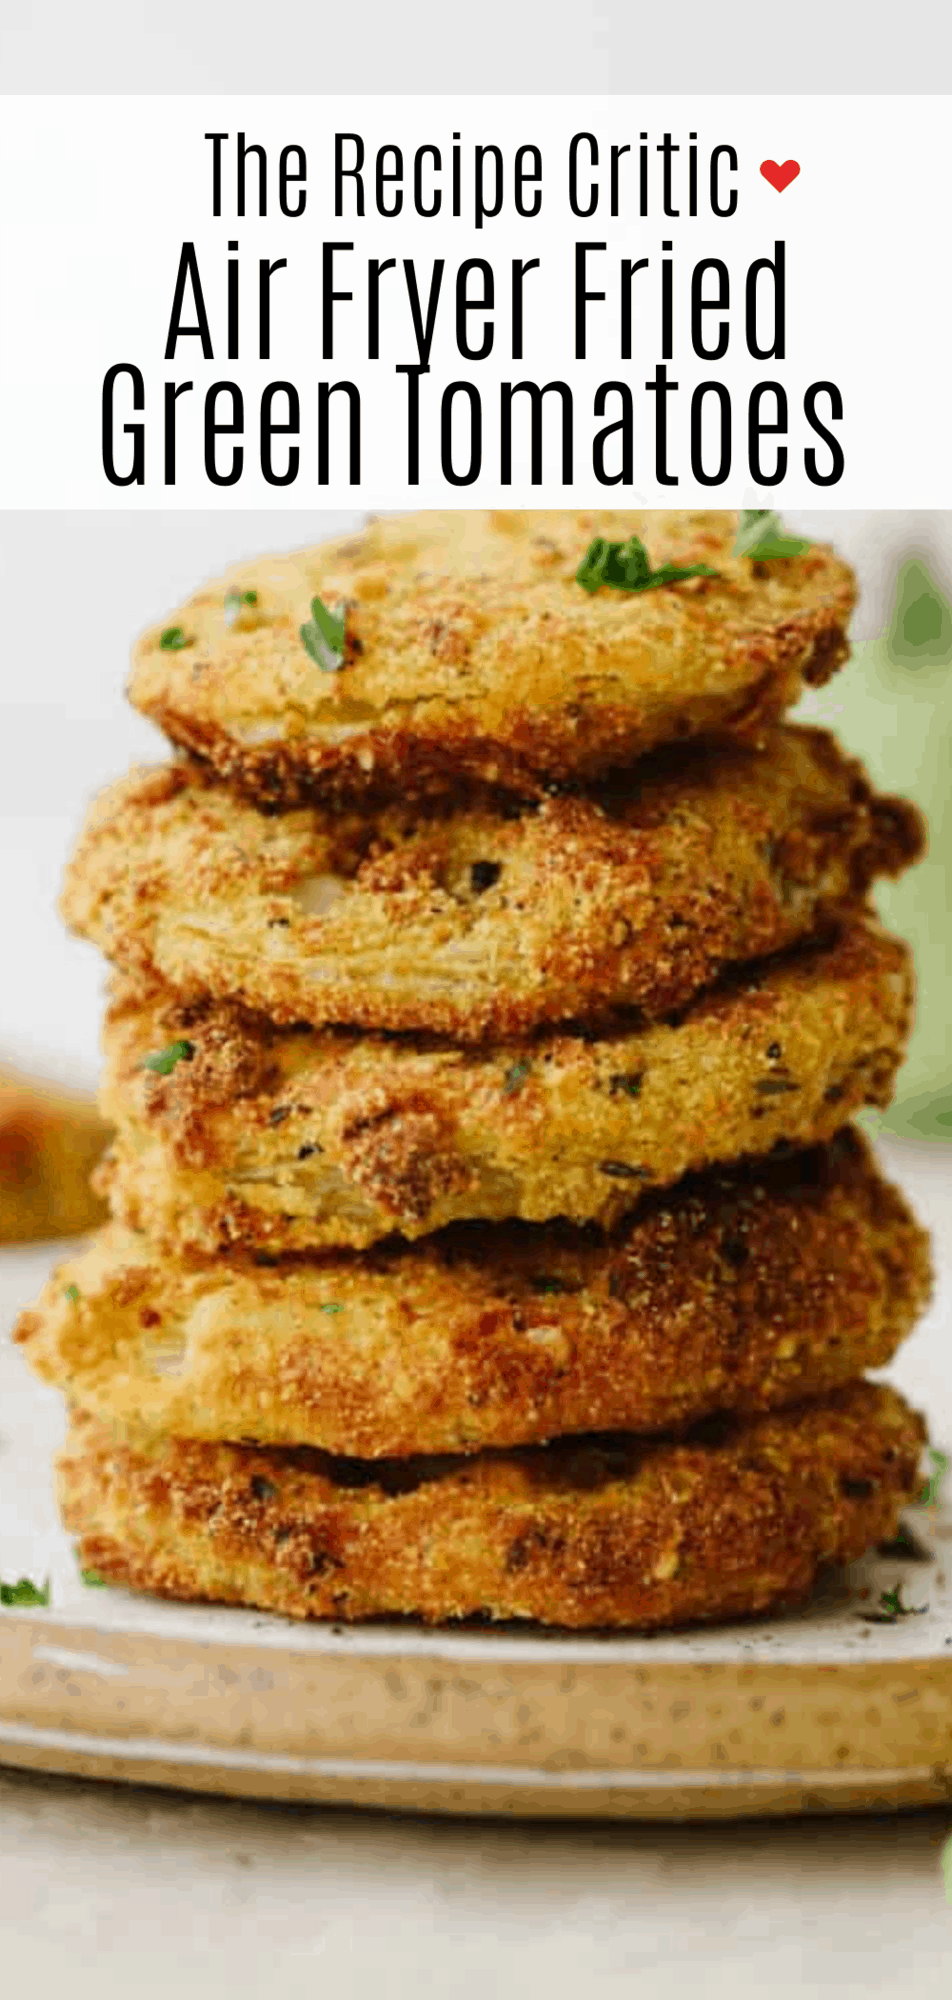 Air Fryer Fried Green Tomatoes Recipe